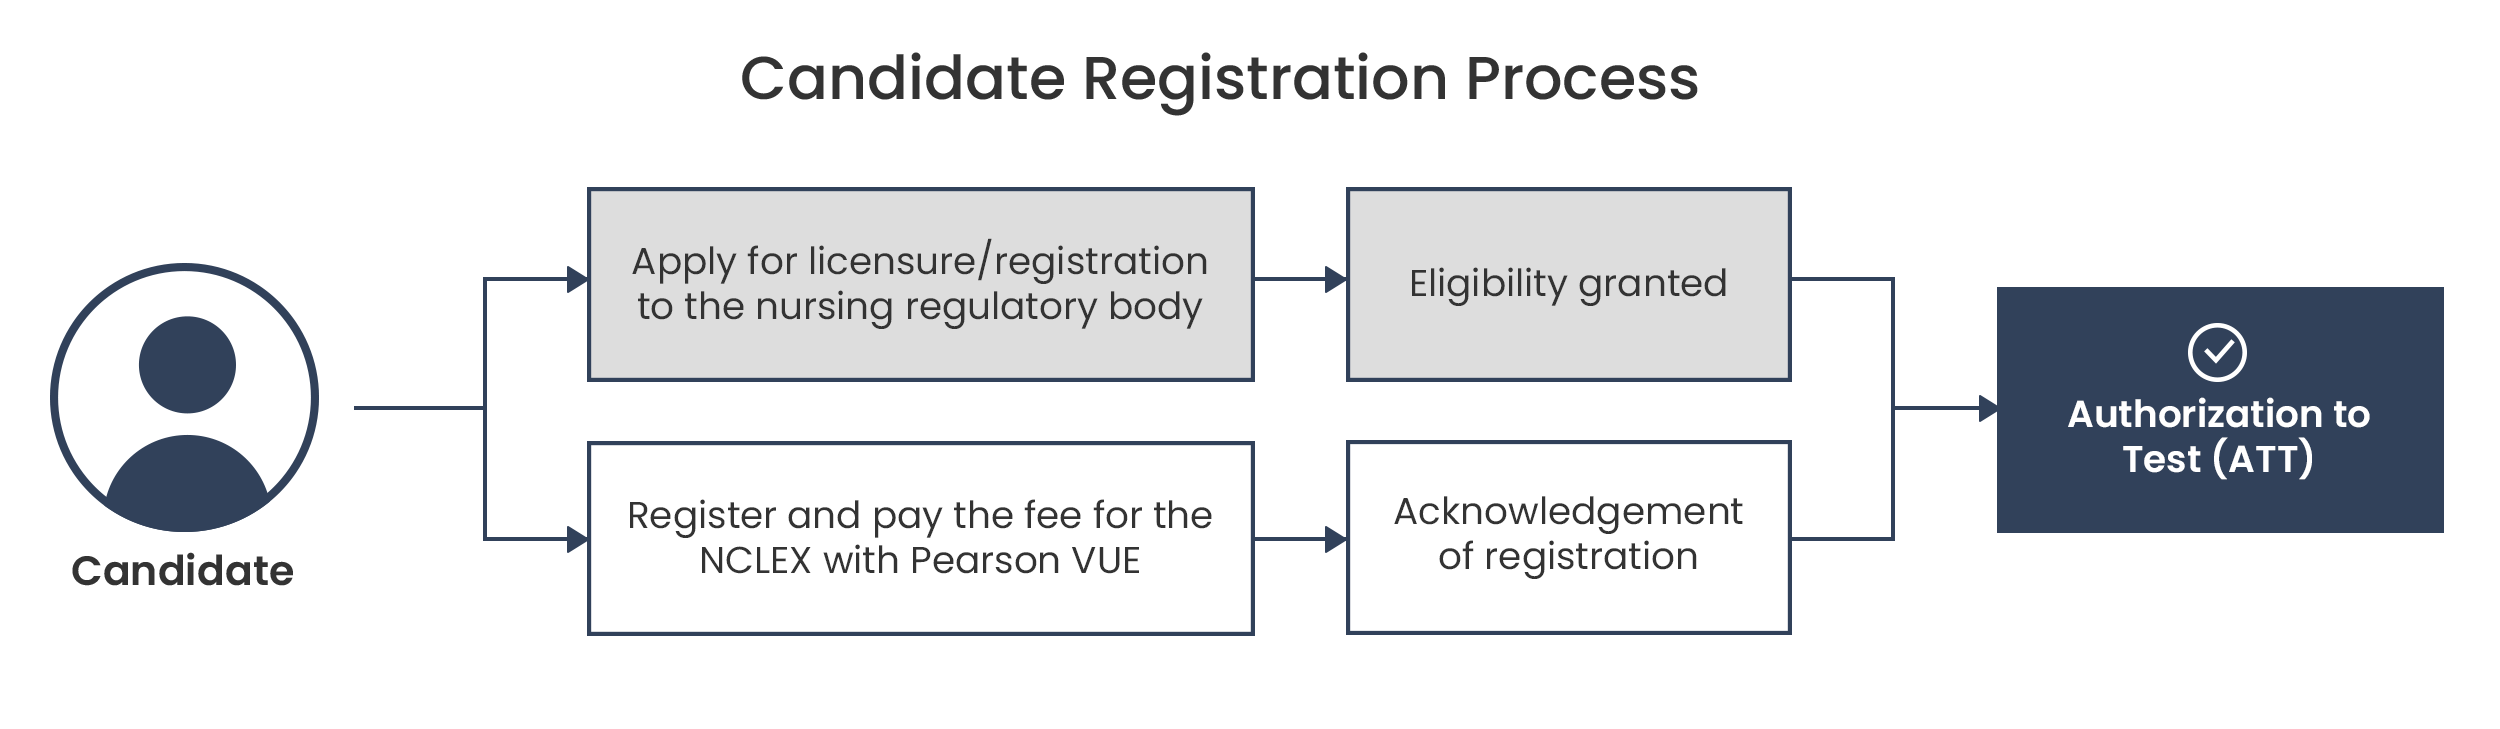 Candidate Registration Process: Apply for licensure to the NRB and register and pay the fee for the NCLEX with Pearson VUE, Once eligibility is granted and you get acknowledgement of registration you will receive your ATT